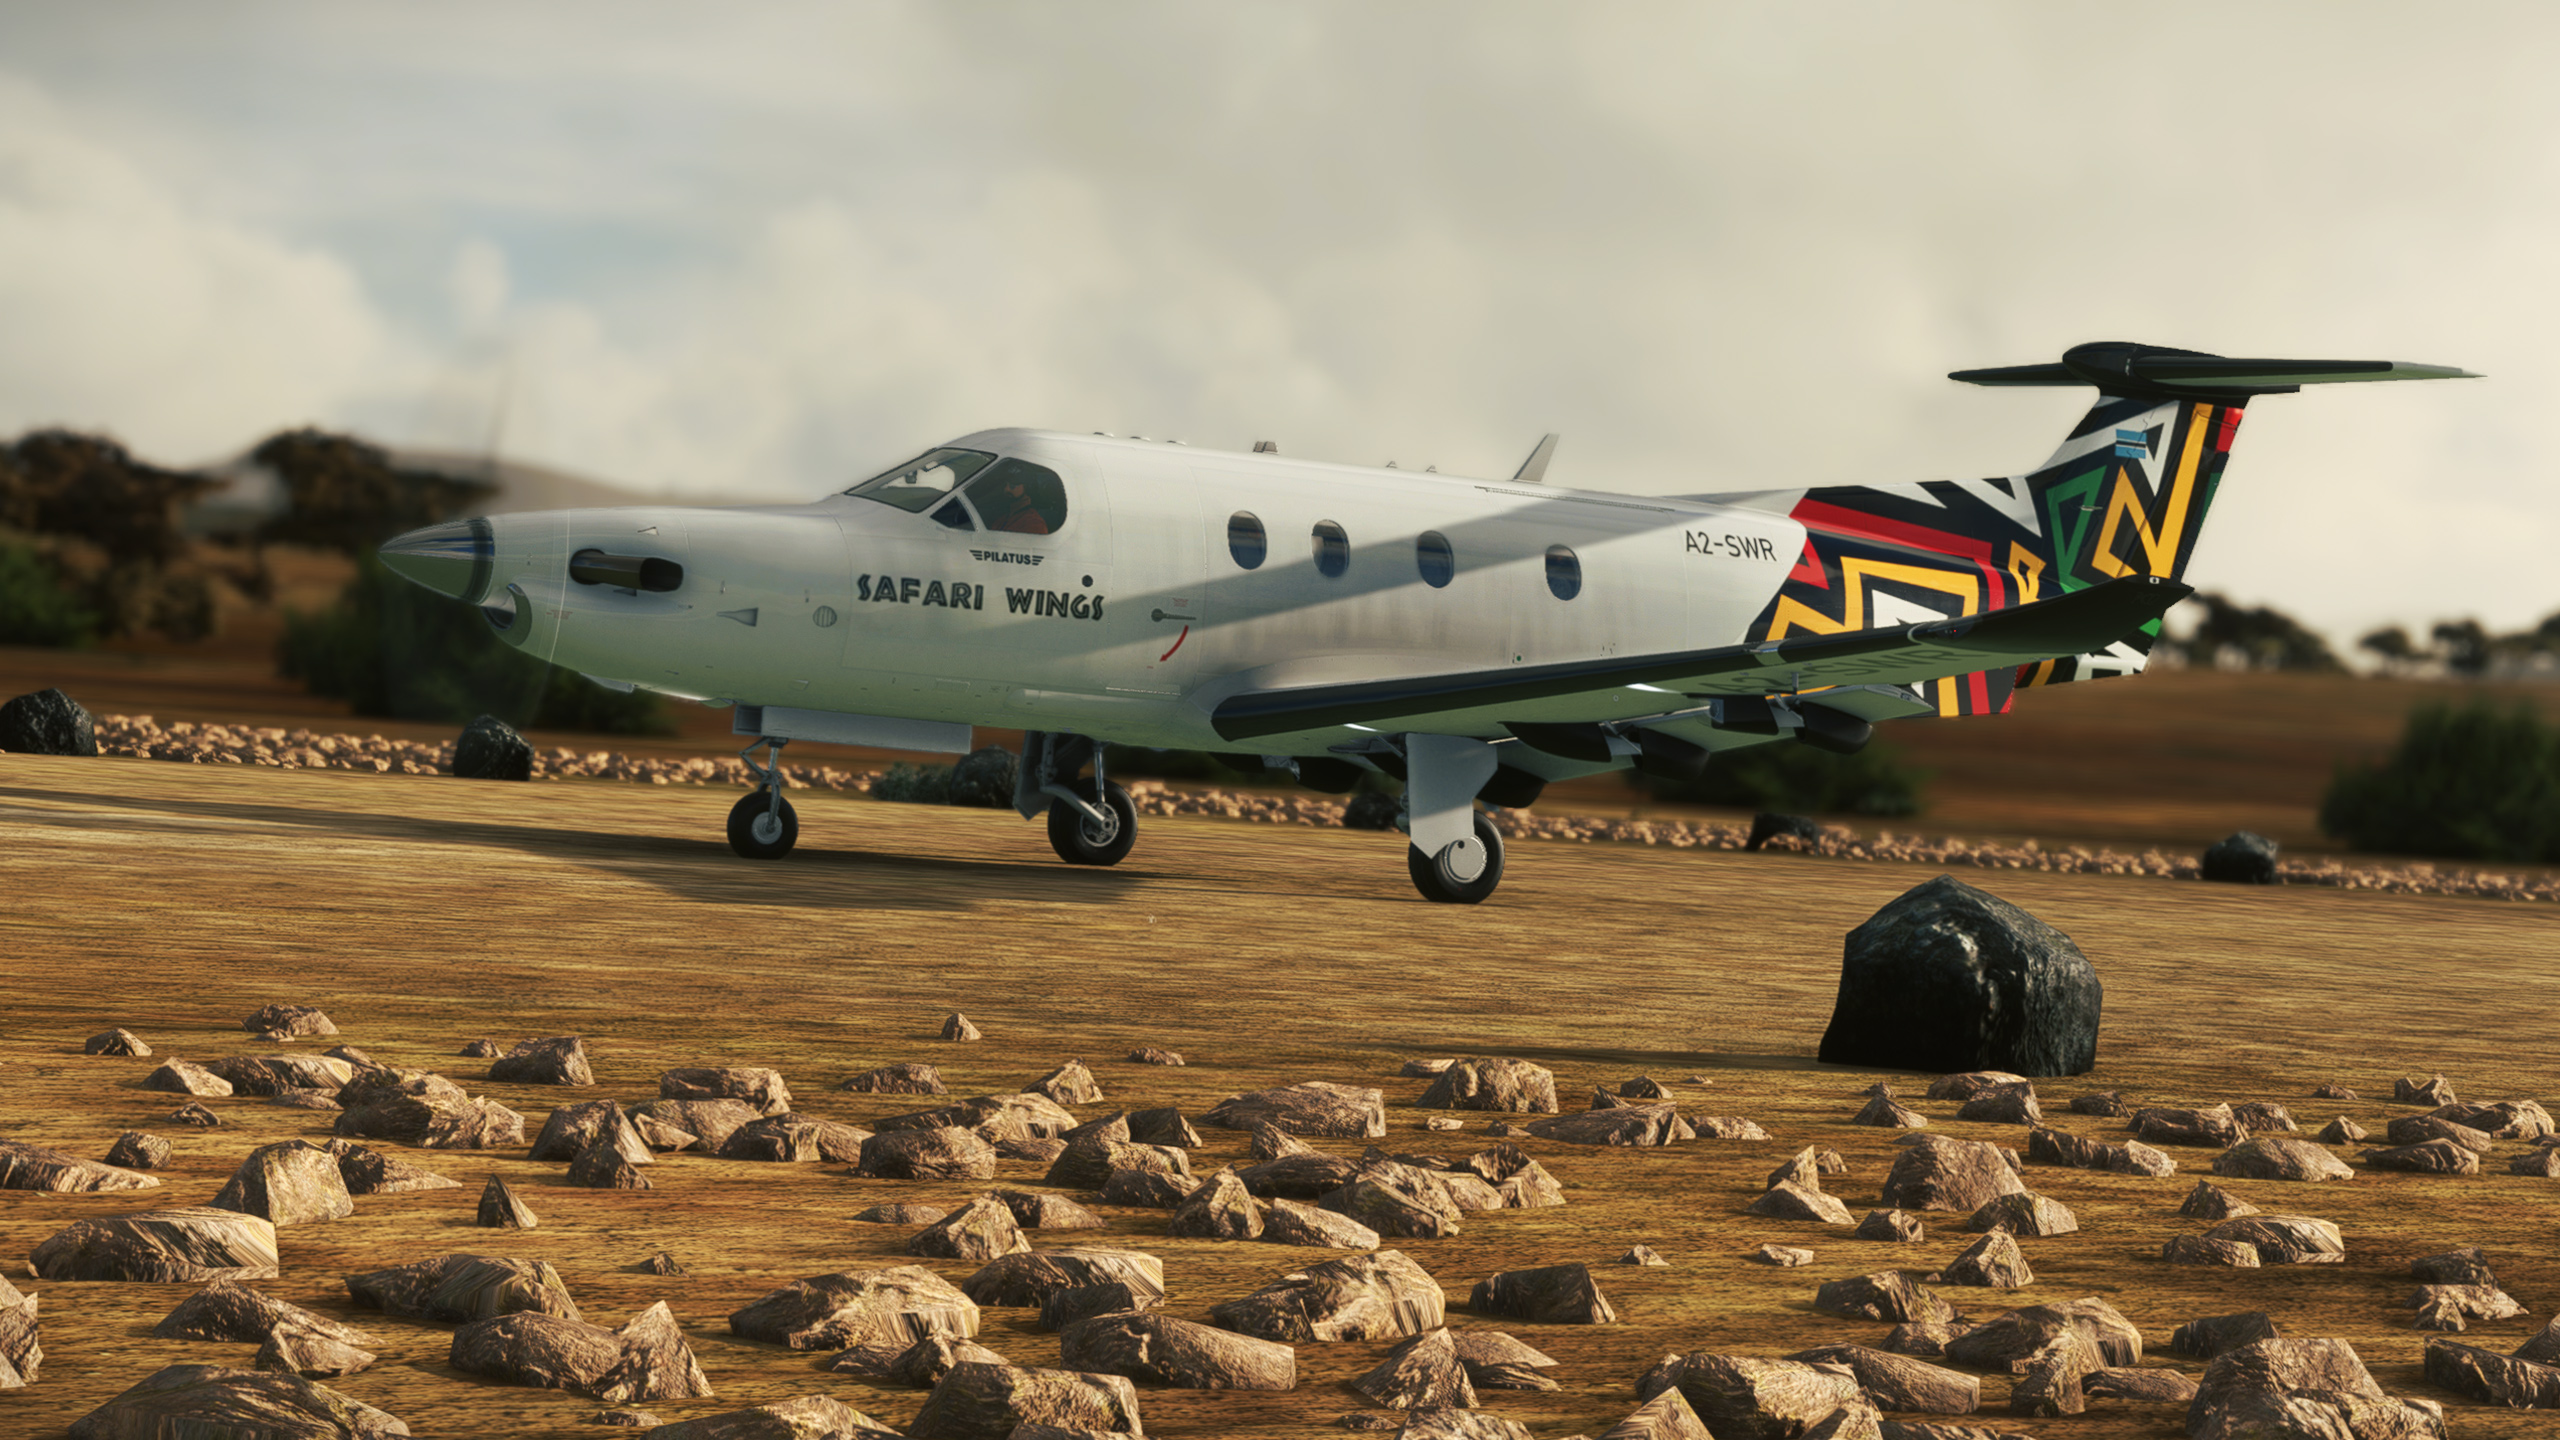 SimWorks Studios is wrapping up the Pilatus PC-12 for MSFS - MSFS Addons